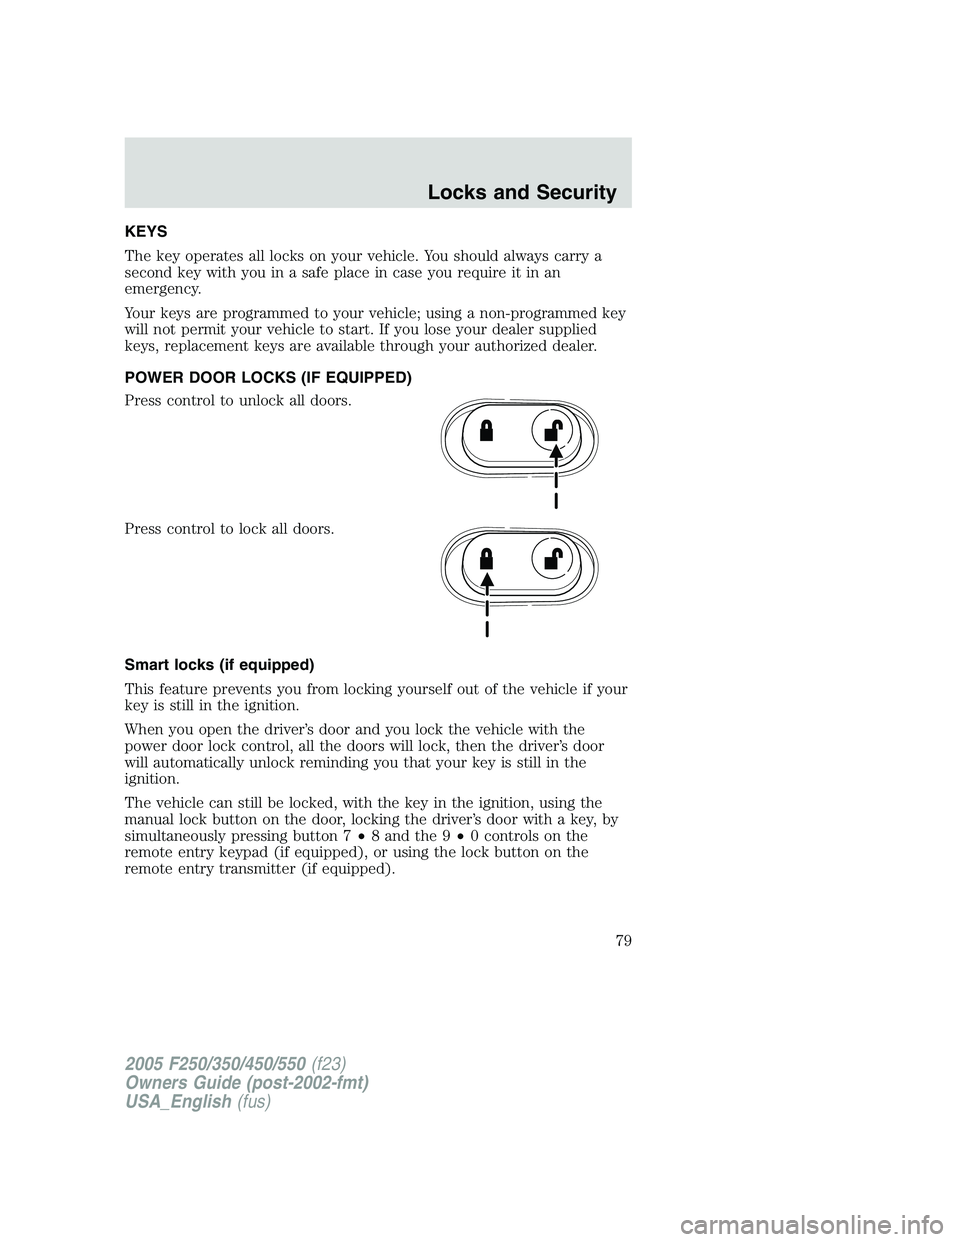 FORD F250 SUPER DUTY 2005 Manual PDF KEYS
The key operates all locks on your vehicle. You should always carry a
second key with you in a safe place in case you require it in an
emergency.
Your keys are programmed to your vehicle; using a